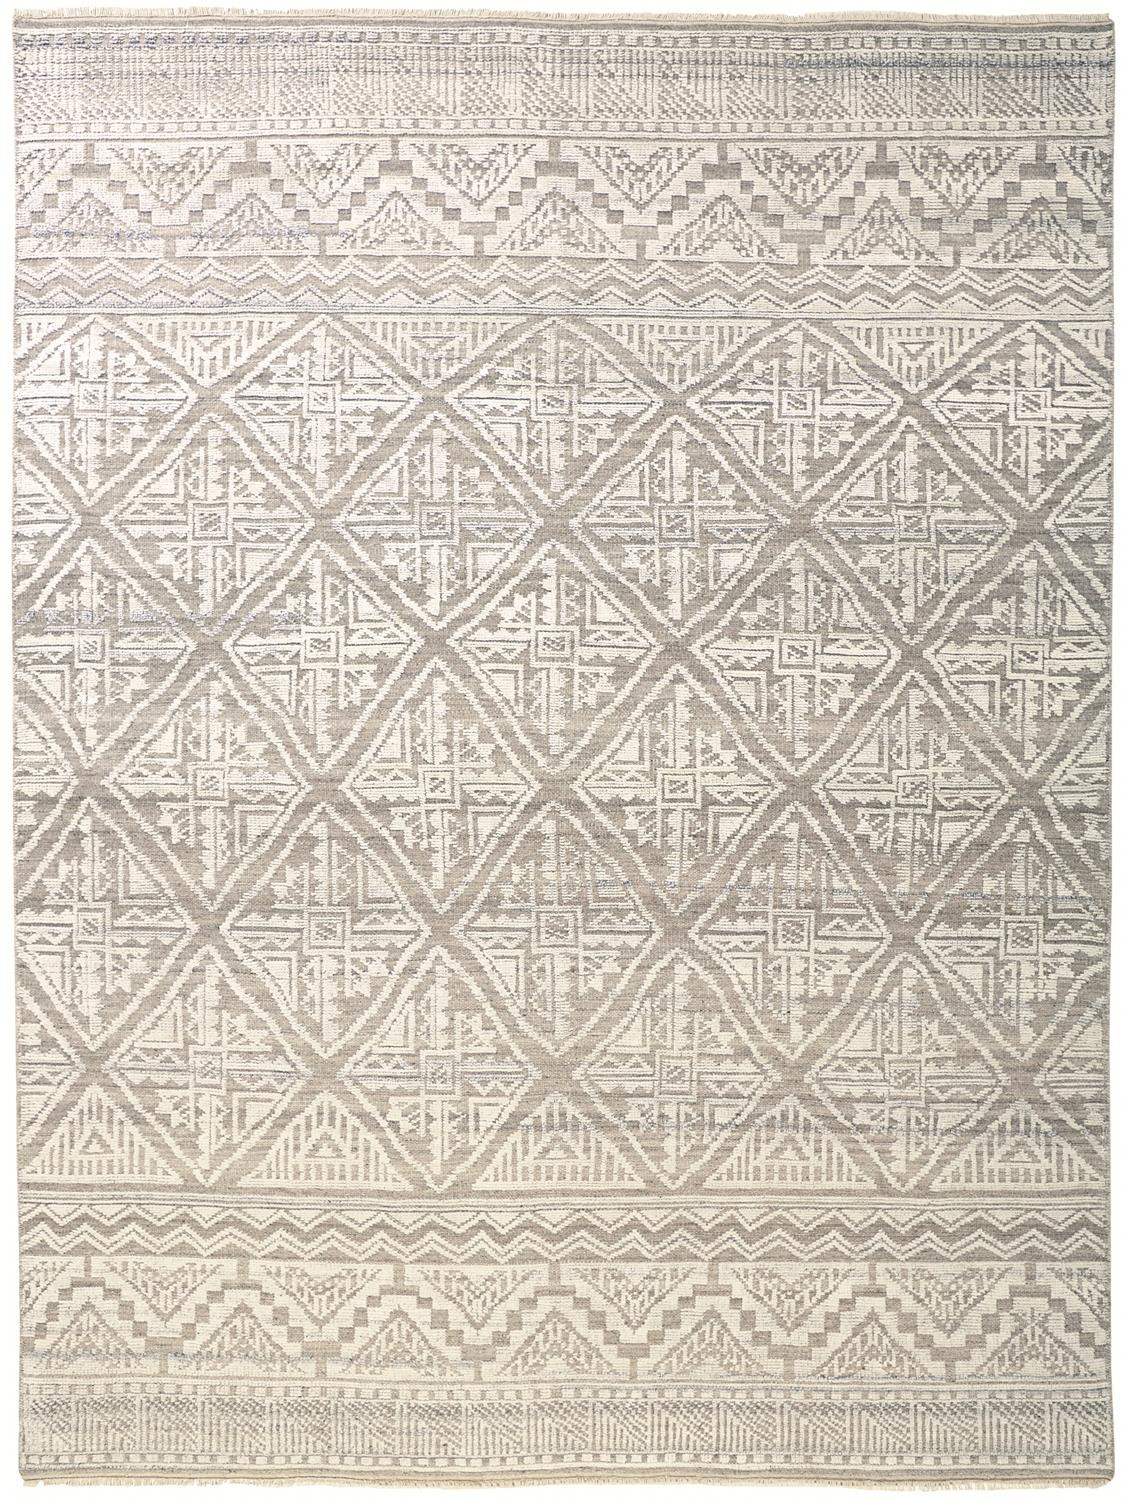 5' X 8' Ivory Tan And Gray Geometric Hand Knotted Area Rug-512581-1